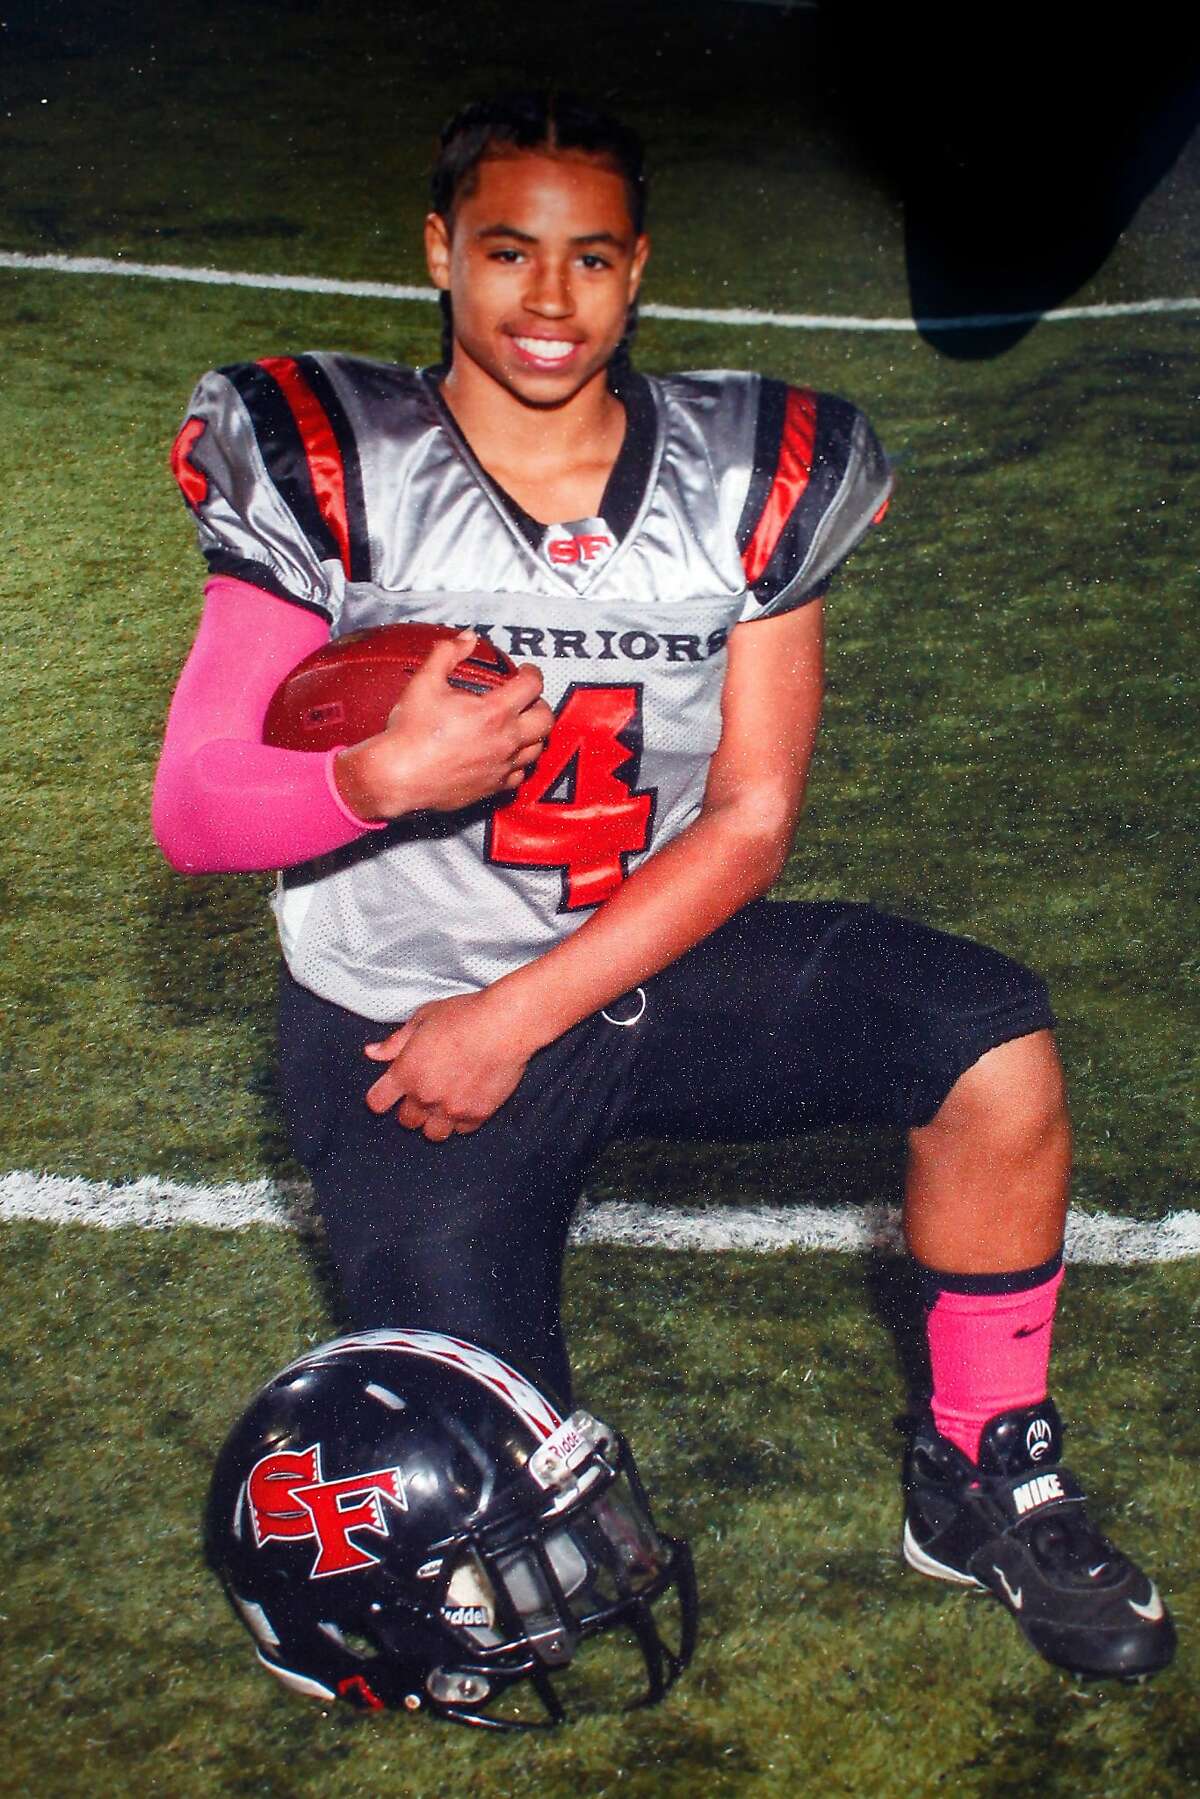 The most recent pop warner football photo of Rashawn Williams, a 14-year-old freshman at Sacred Heart Cathedral in San Francisco, who was fatally stabbed in the Mission District on Tuesday evening, in San Francisco, Calif., on Wednesday, September 3, 2014.